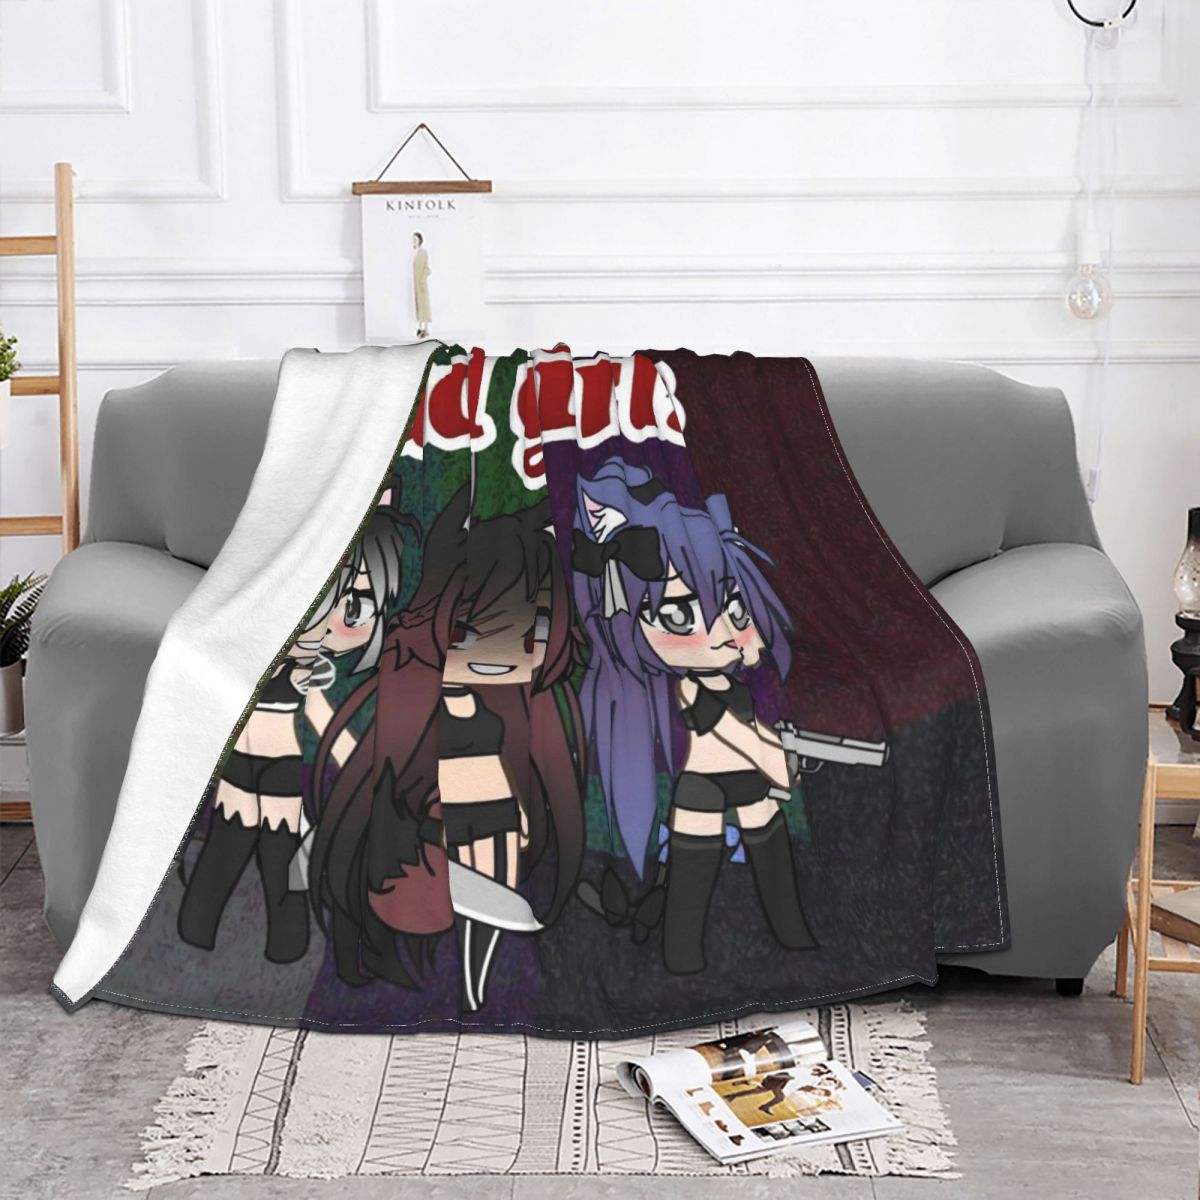 Meng Cho shoplifted this blanket! Blank Meme Template